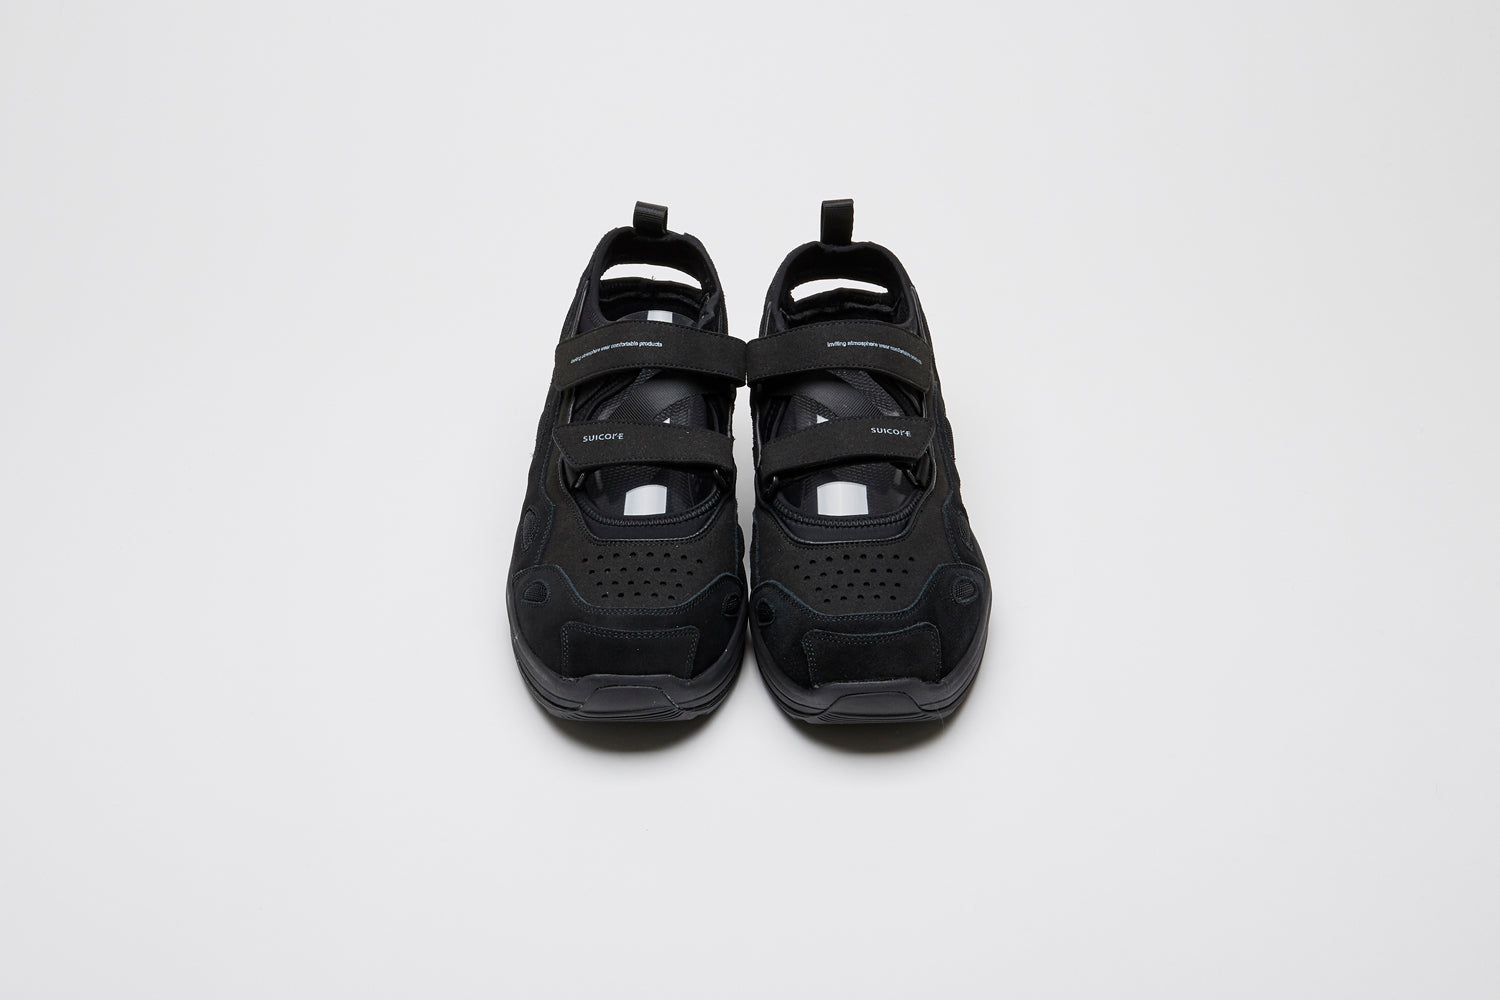 SUICOKE AKK-ab shoes with black cow suede and nylon upper, black midsole and sole, straps and logo patch. From Spring/Summer 2022 collection on SUICOKE Official US & Canada Webstore.